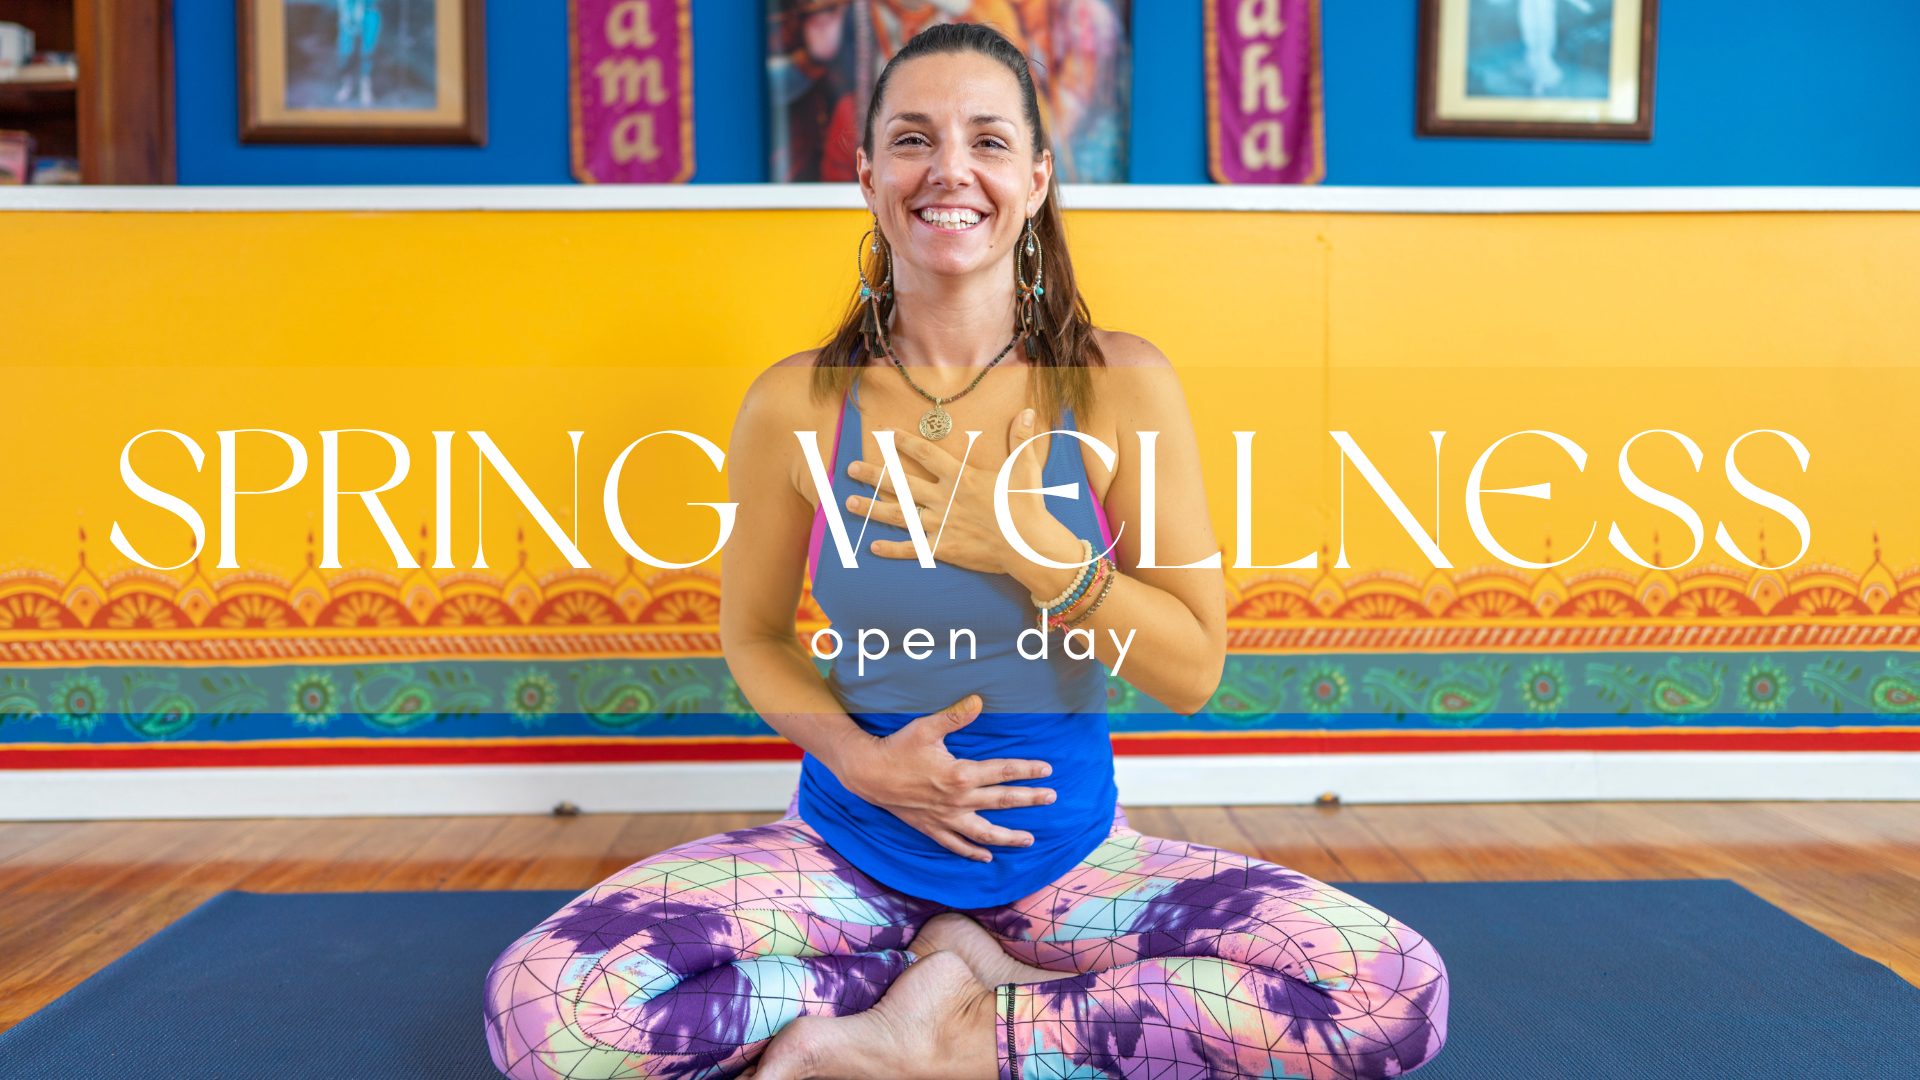 Free Spring Wellness Open Day